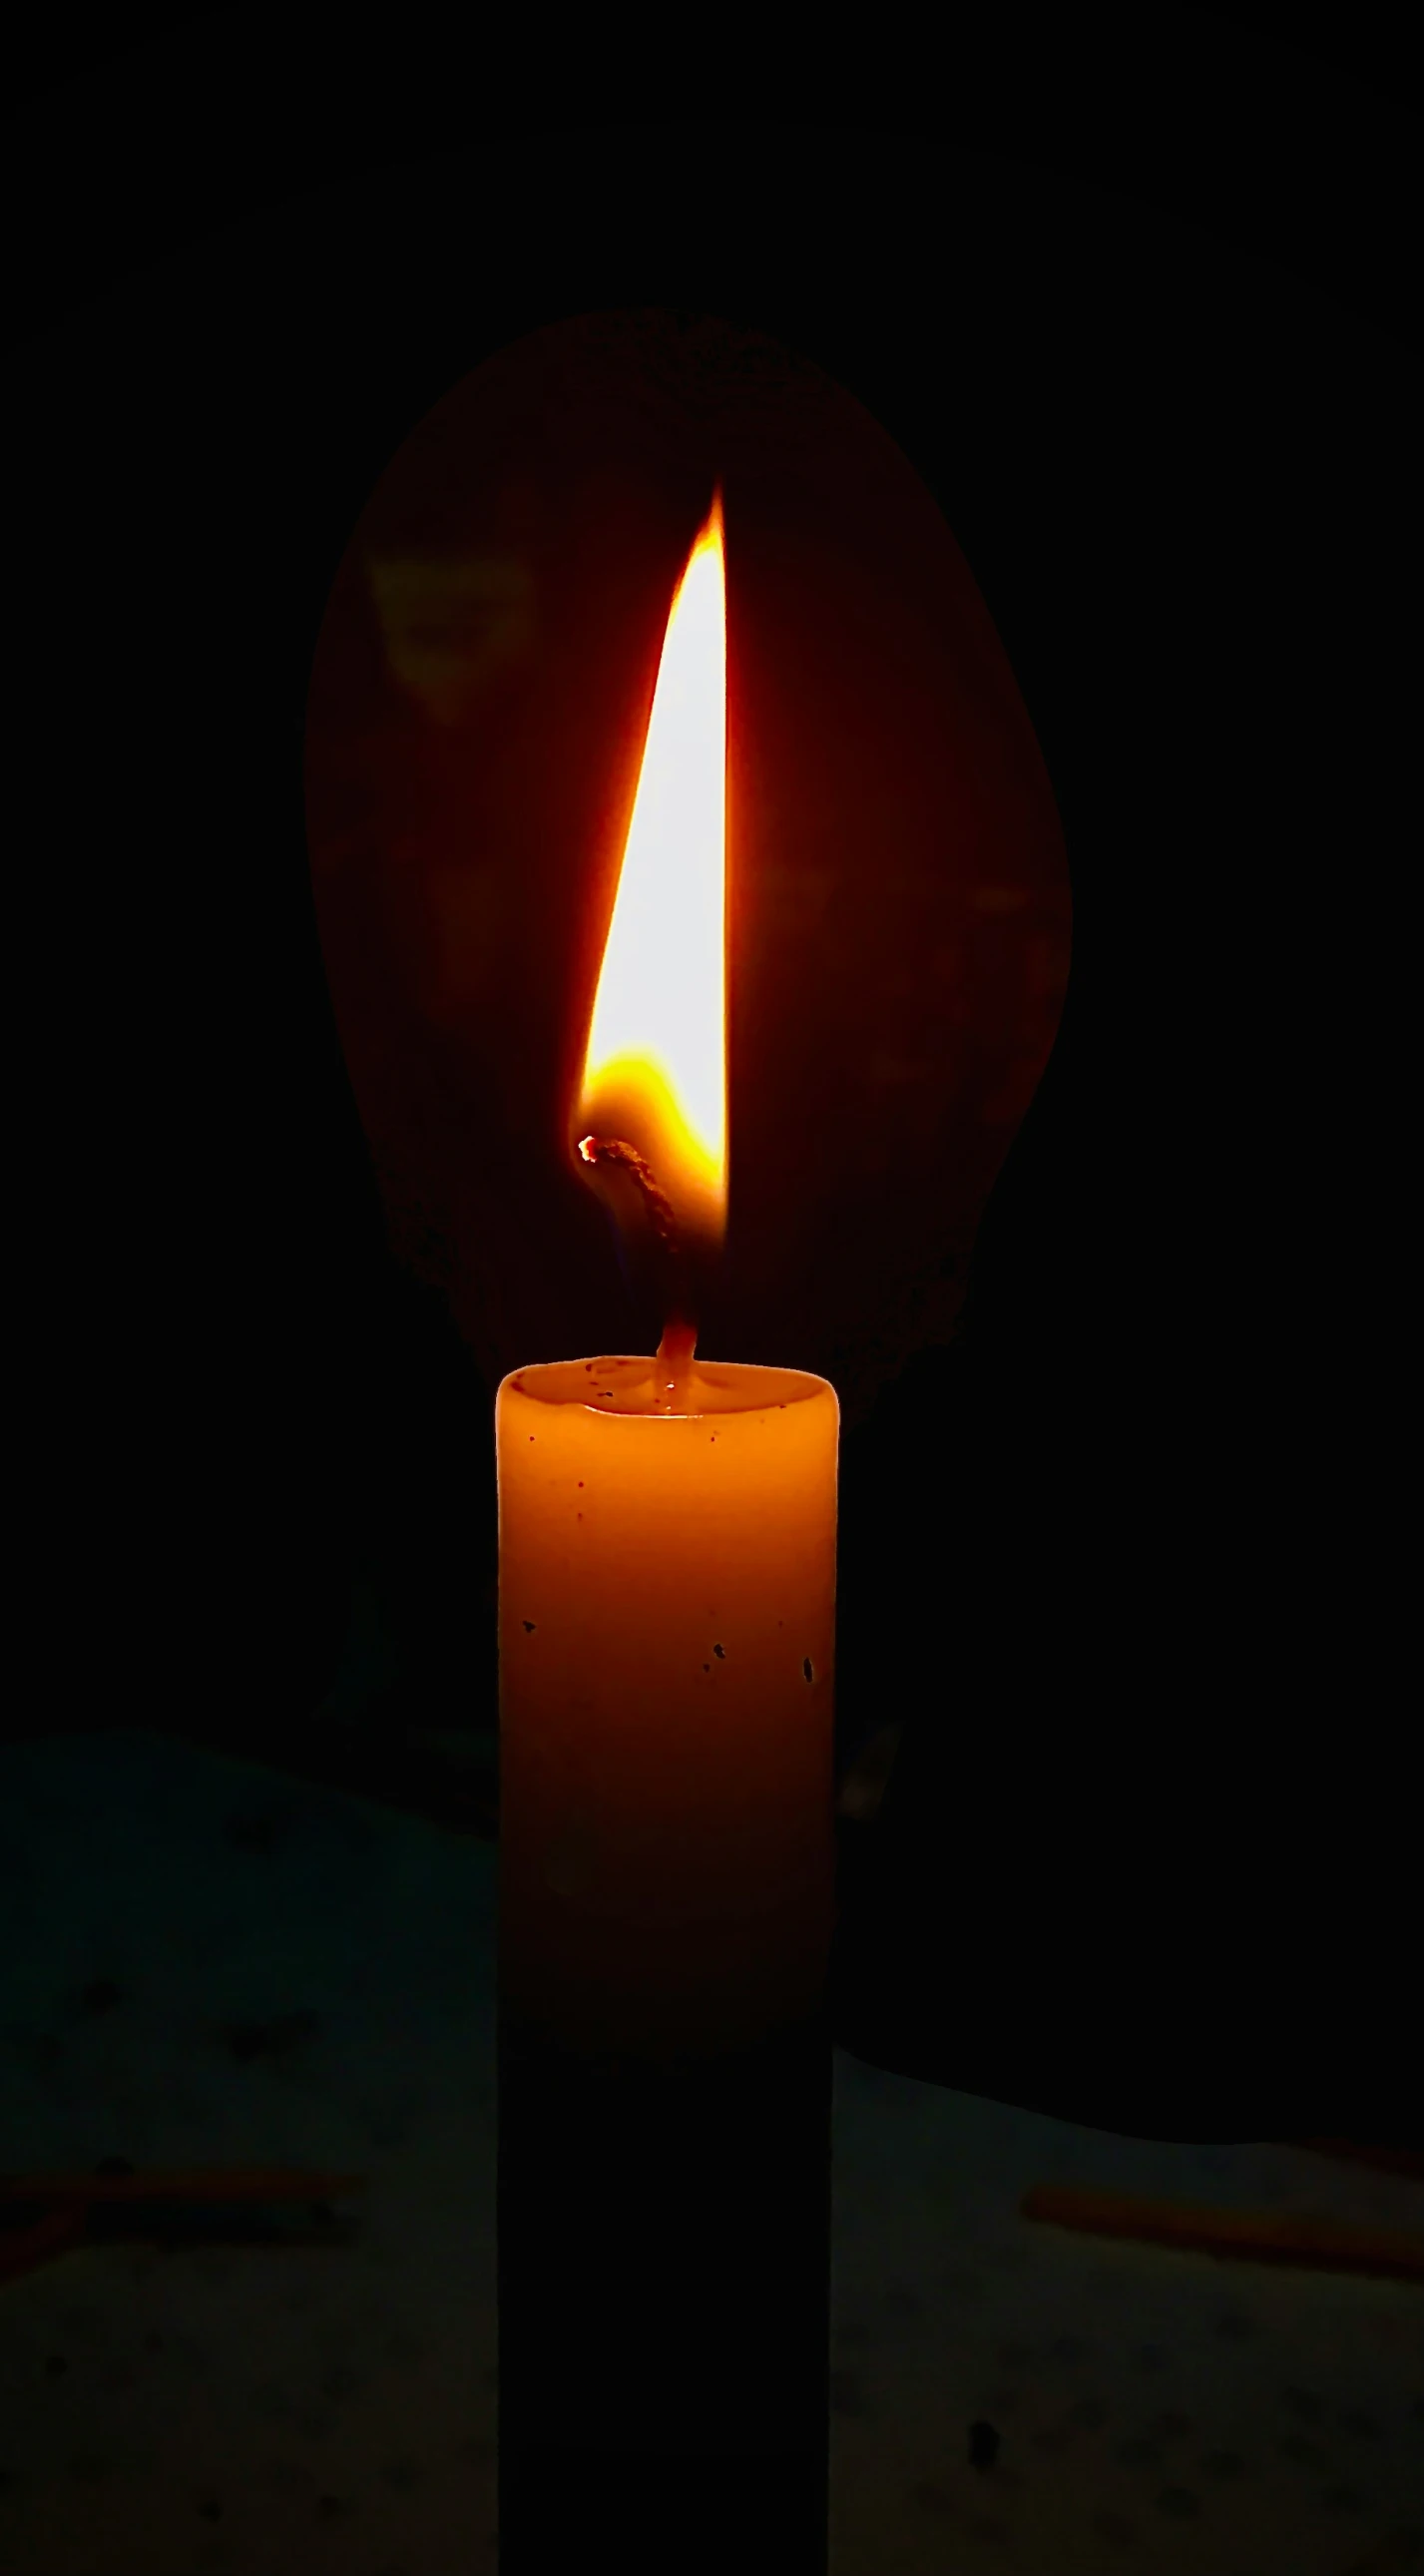 a lit candle is shown in a dark room